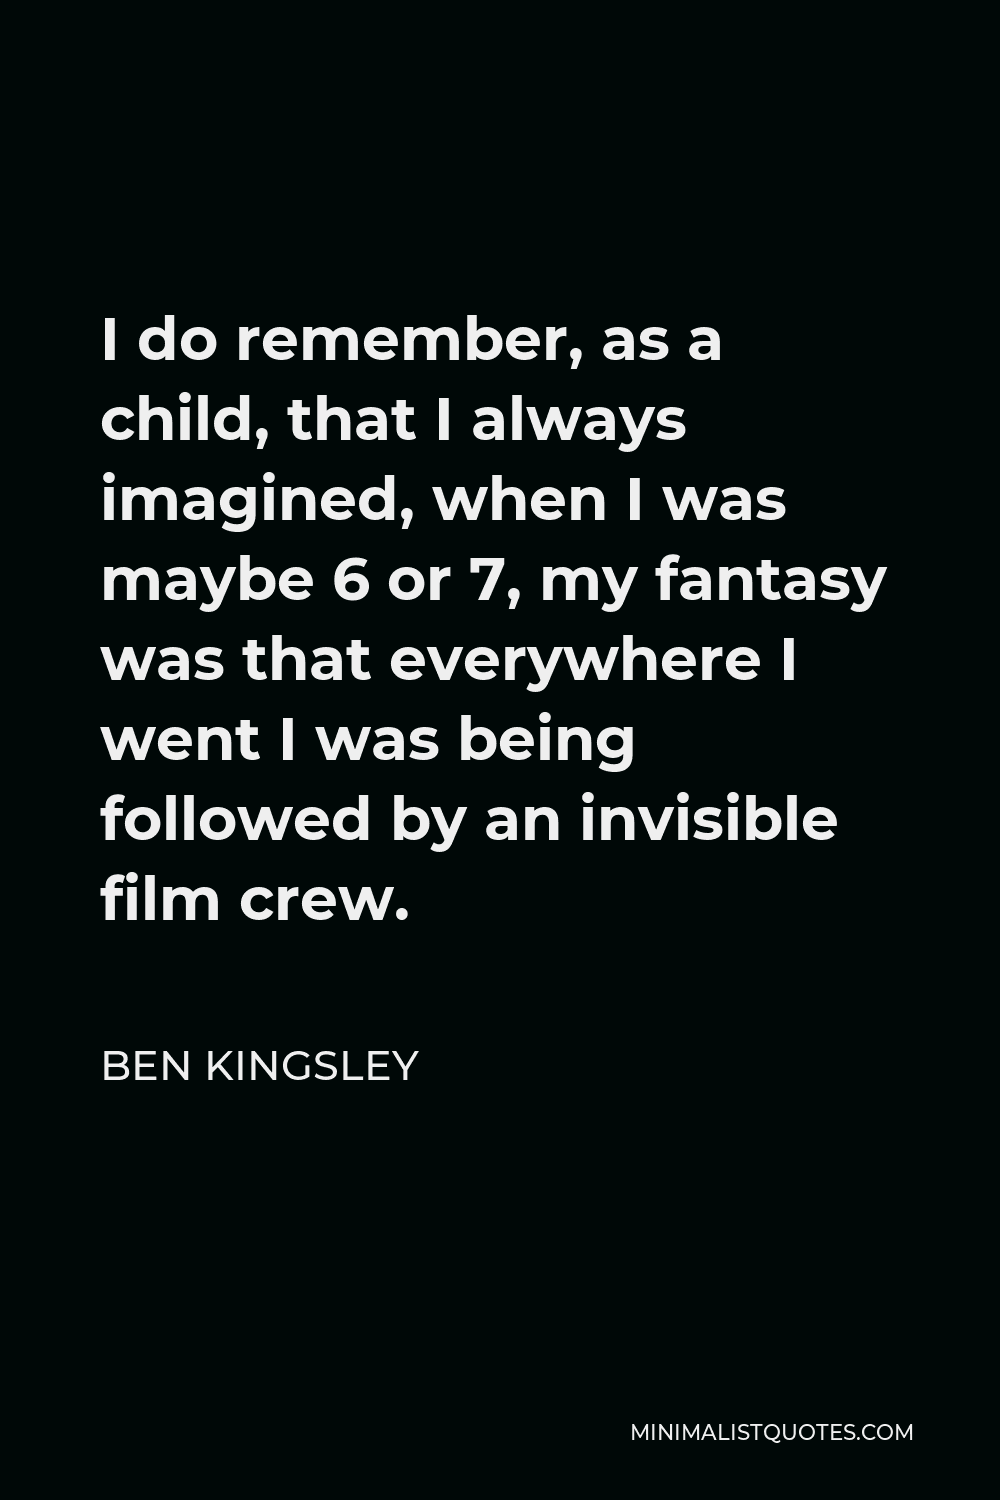 Ben Kingsley Quote - I do remember, as a child, that I always imagined, when I was maybe 6 or 7, my fantasy was that everywhere I went I was being followed by an invisible film crew.